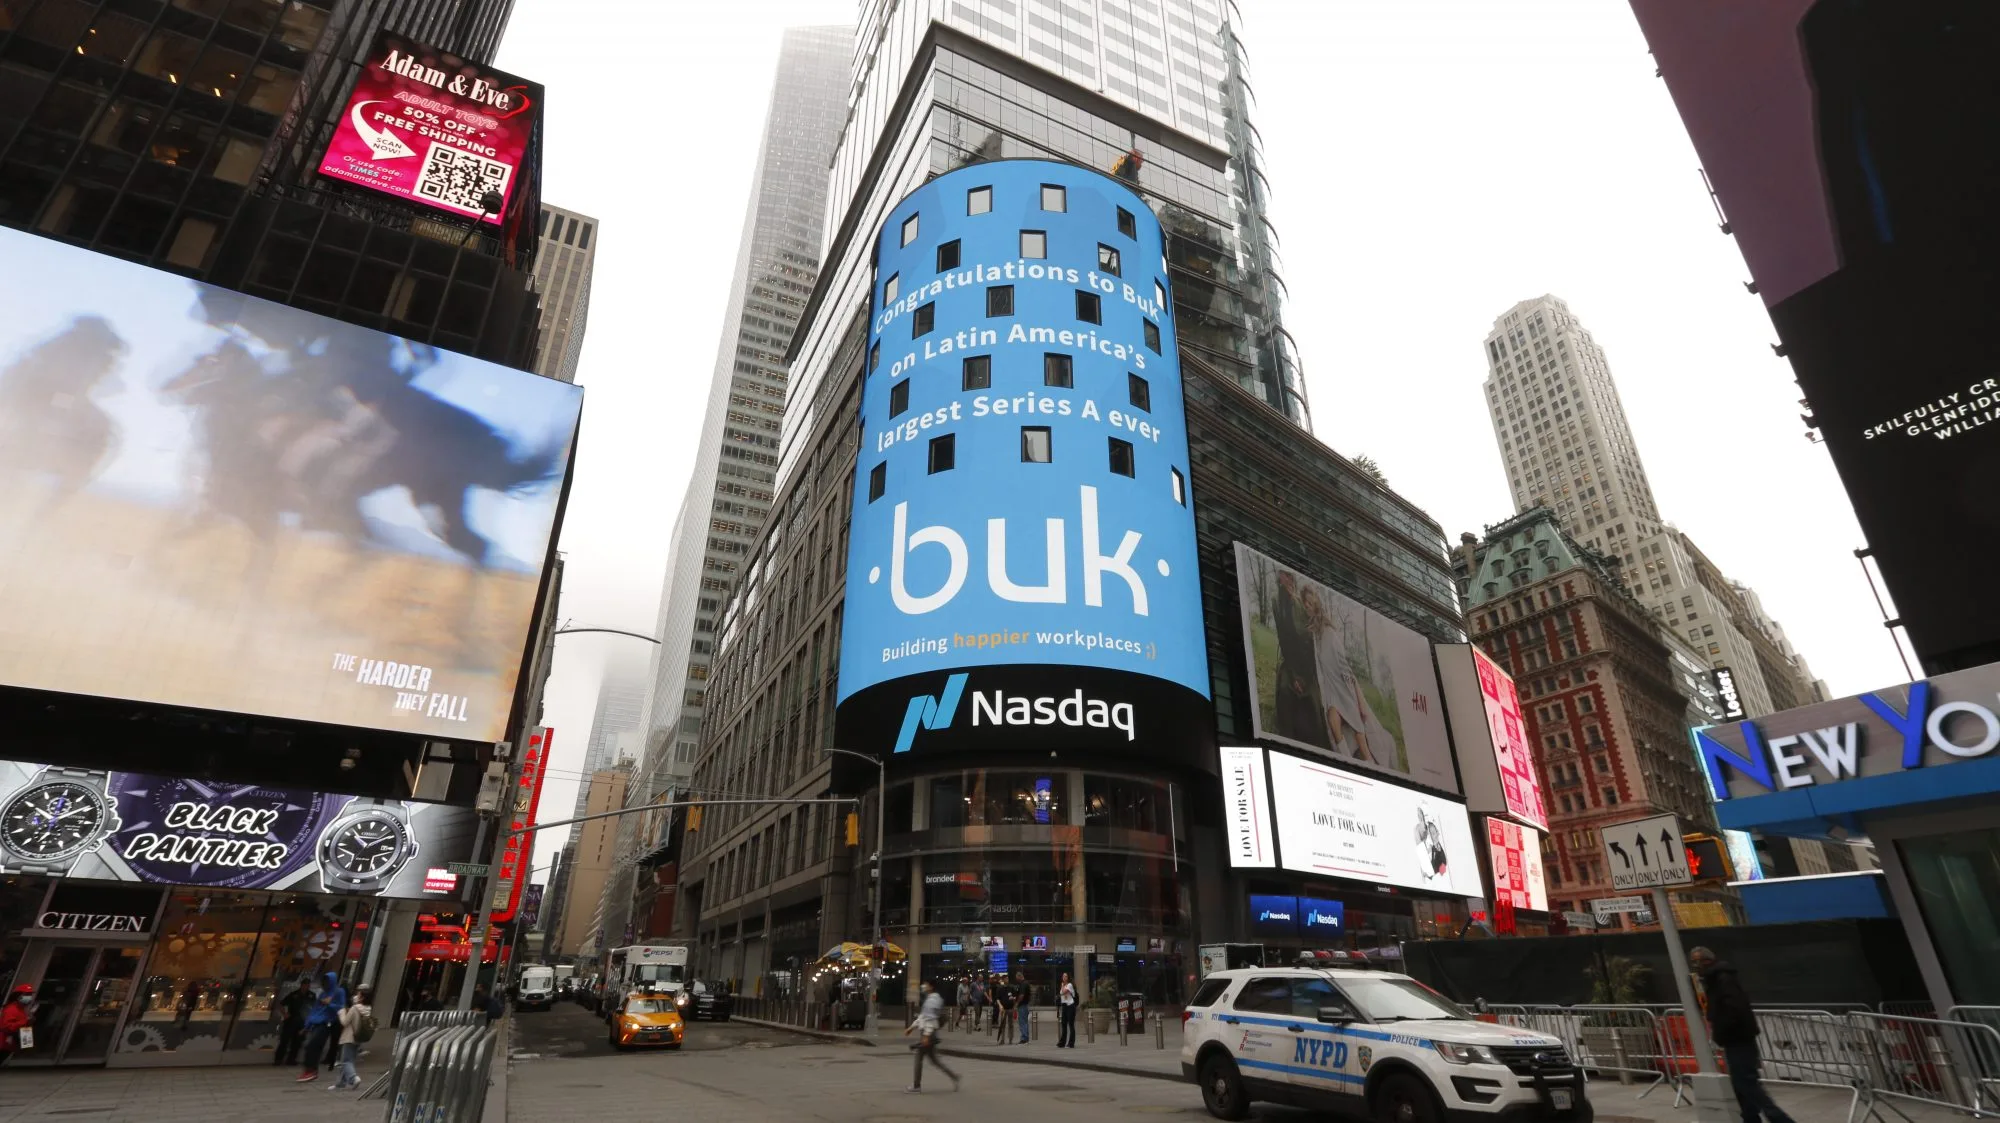 Chile-based Buk HR Raises $50M in Series A Funding Round